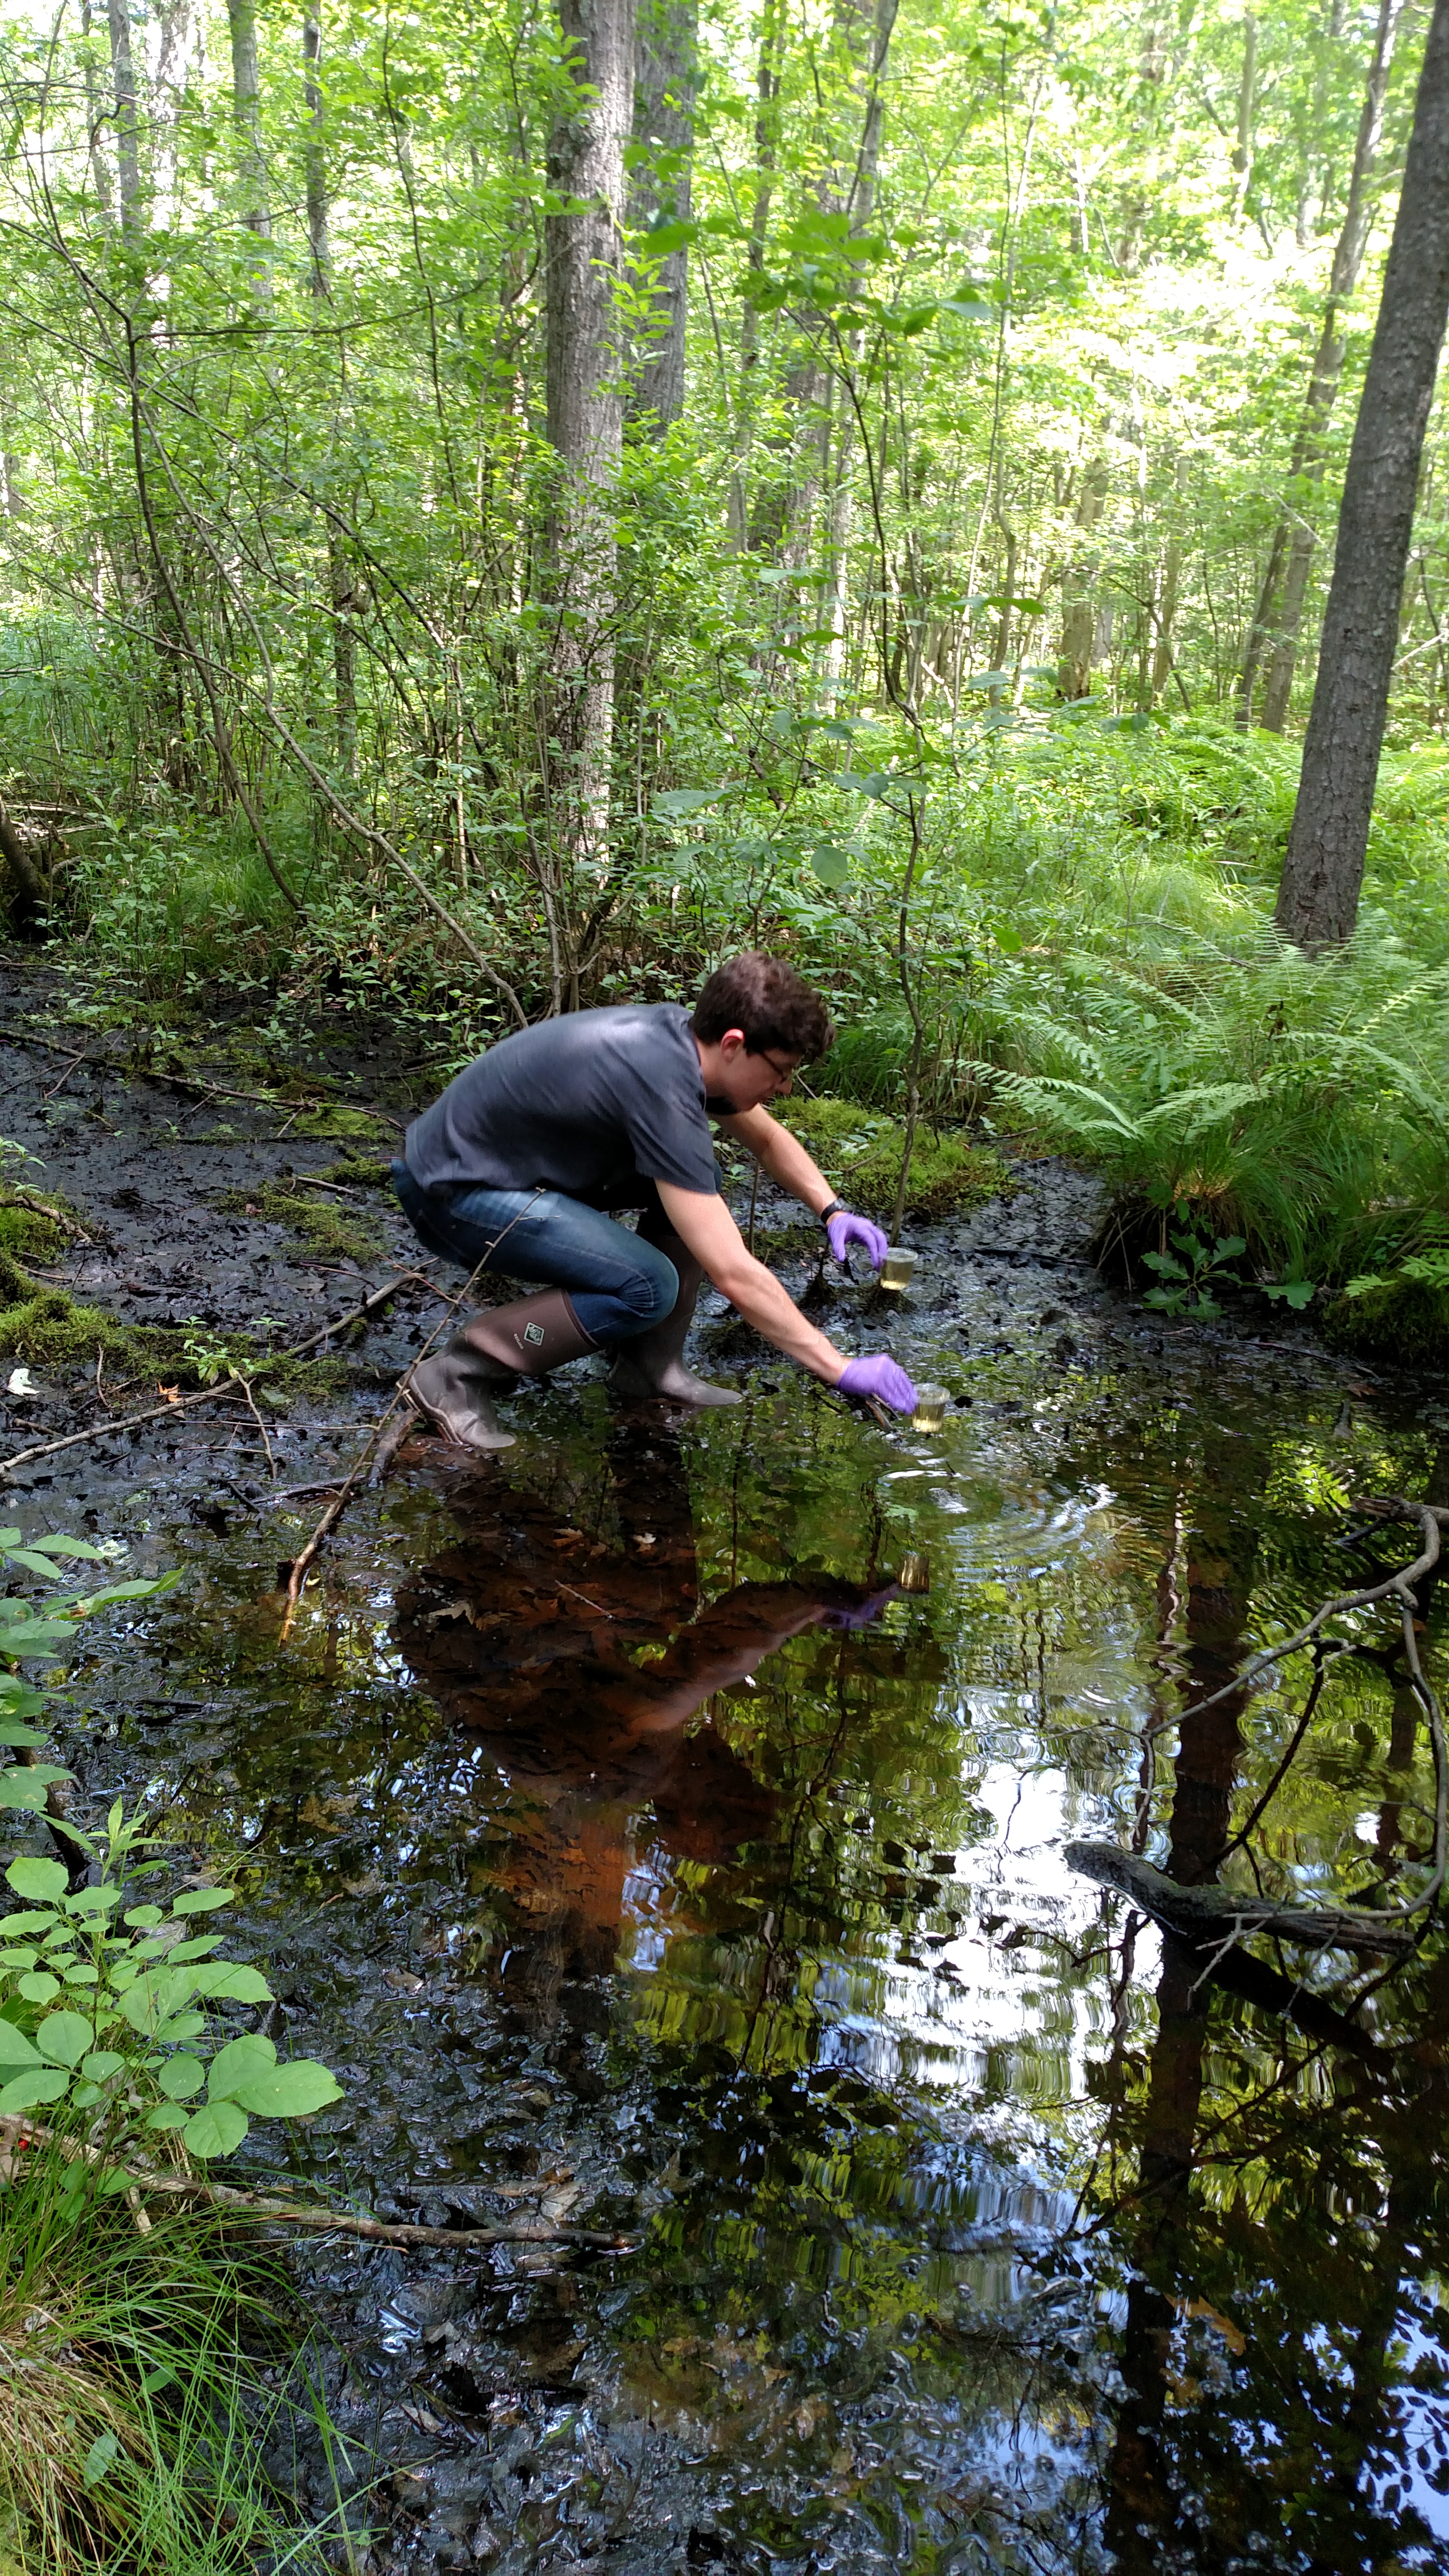 DVM student collecting water samples in the field